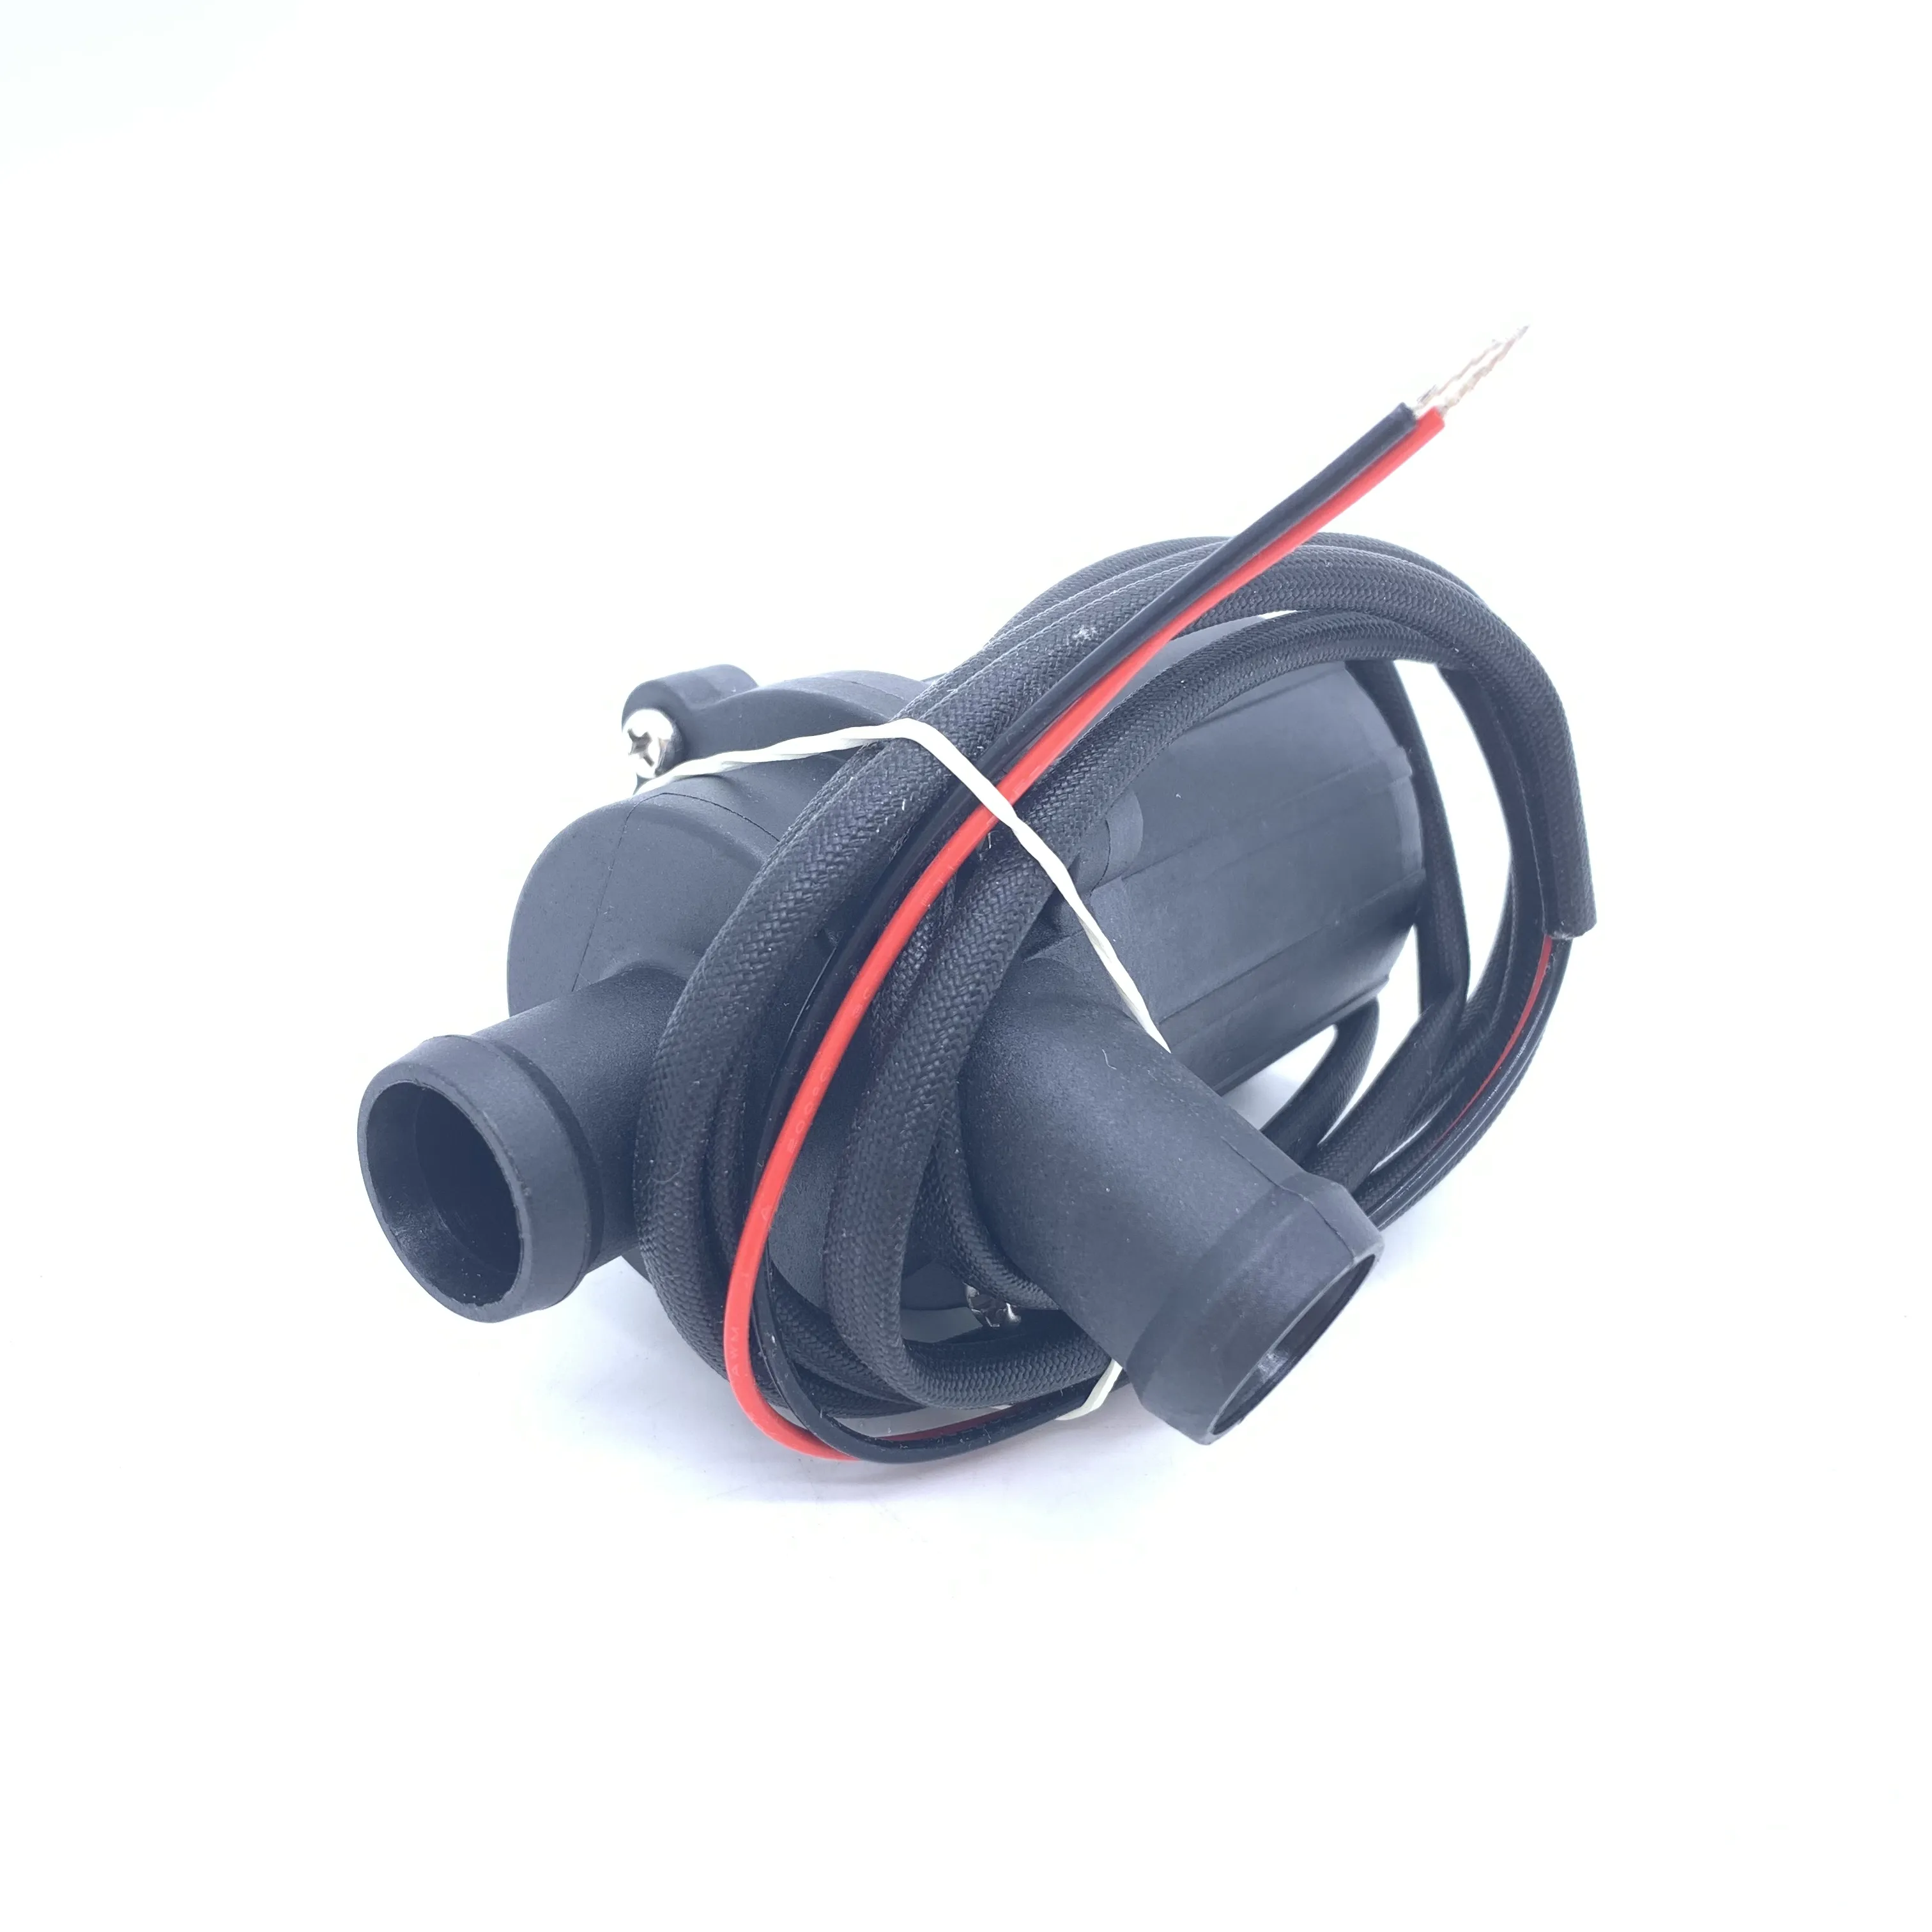 TWPO Motorcycle 12V Electronic Water Pump Motorcycle General Purpose